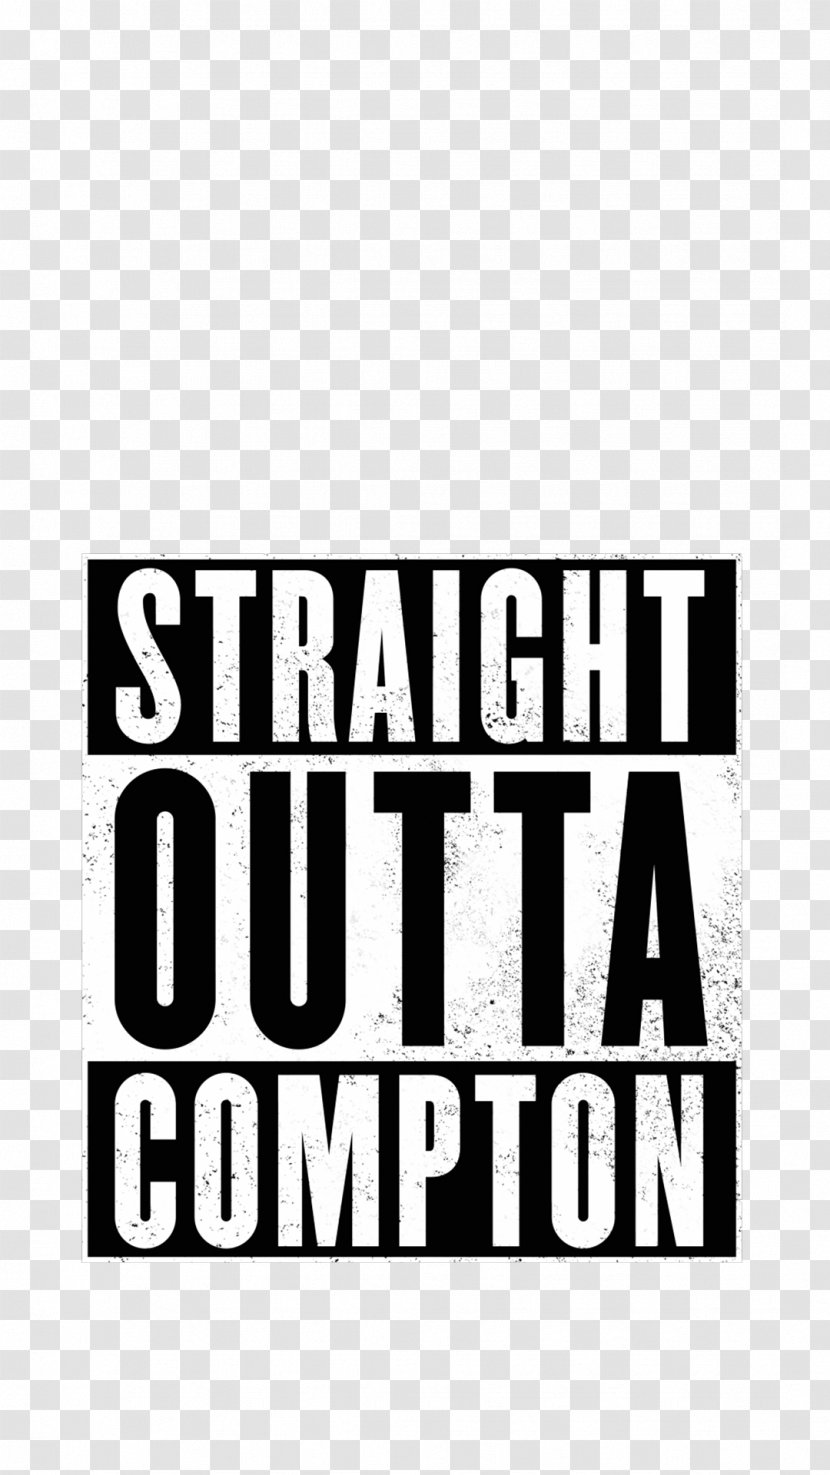 Straight Outta Compton N.W.A. Gangsta Rap Hip Hop - Tree - Silhouette Transparent PNG